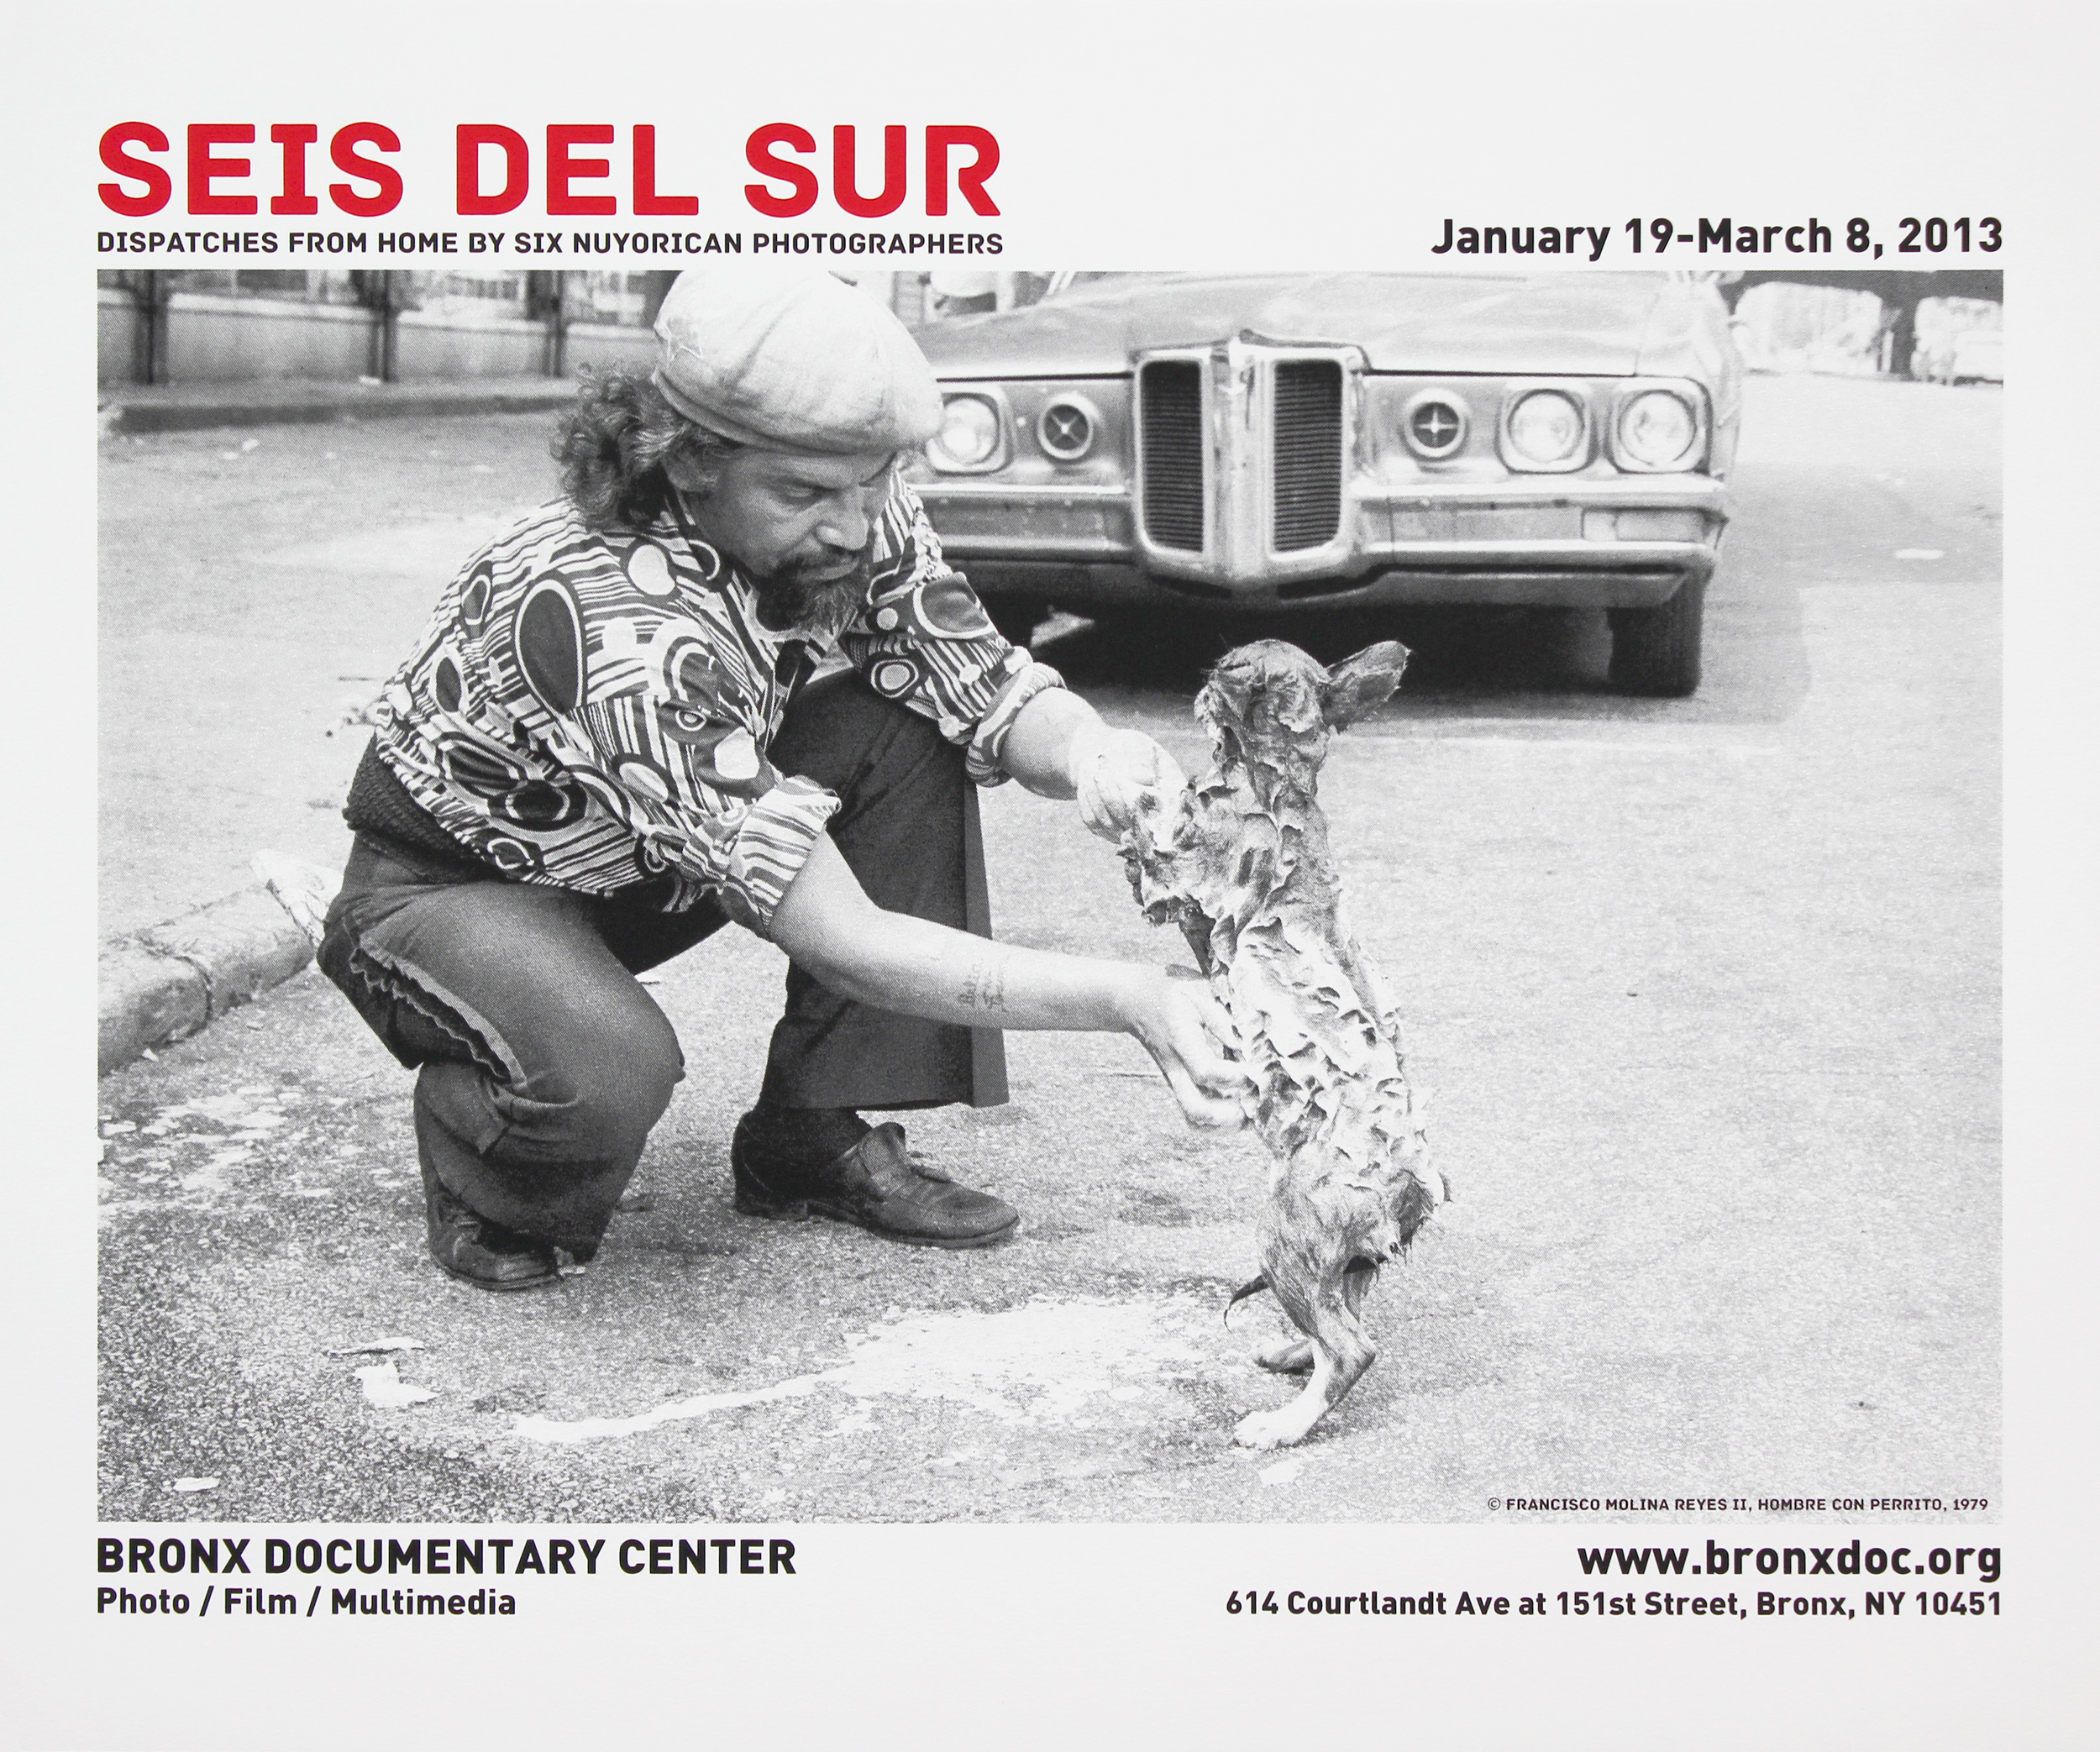 Bronx Doc Center - Seis Del Sur: Dispatches From Home by Six Nuyorican Photographers